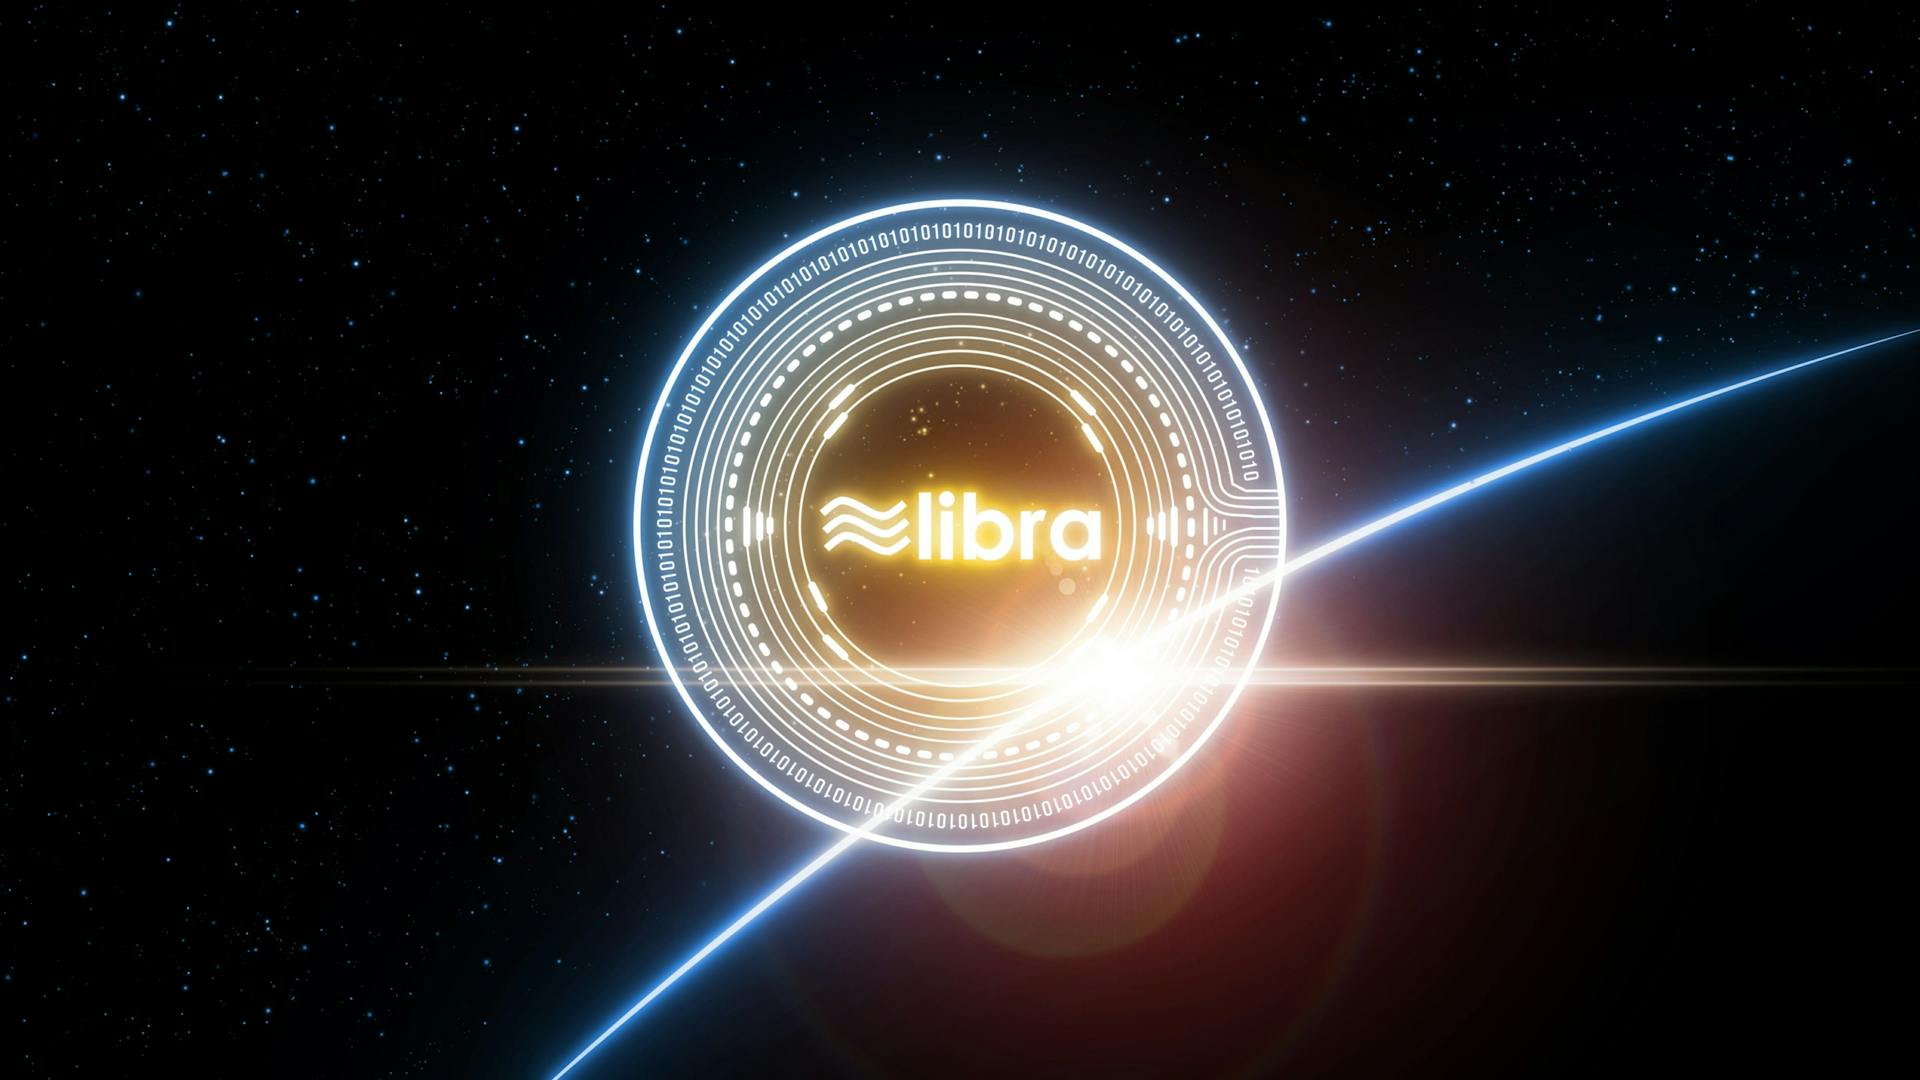 Libra – Tipping the Scales in Favor of Big Tech?